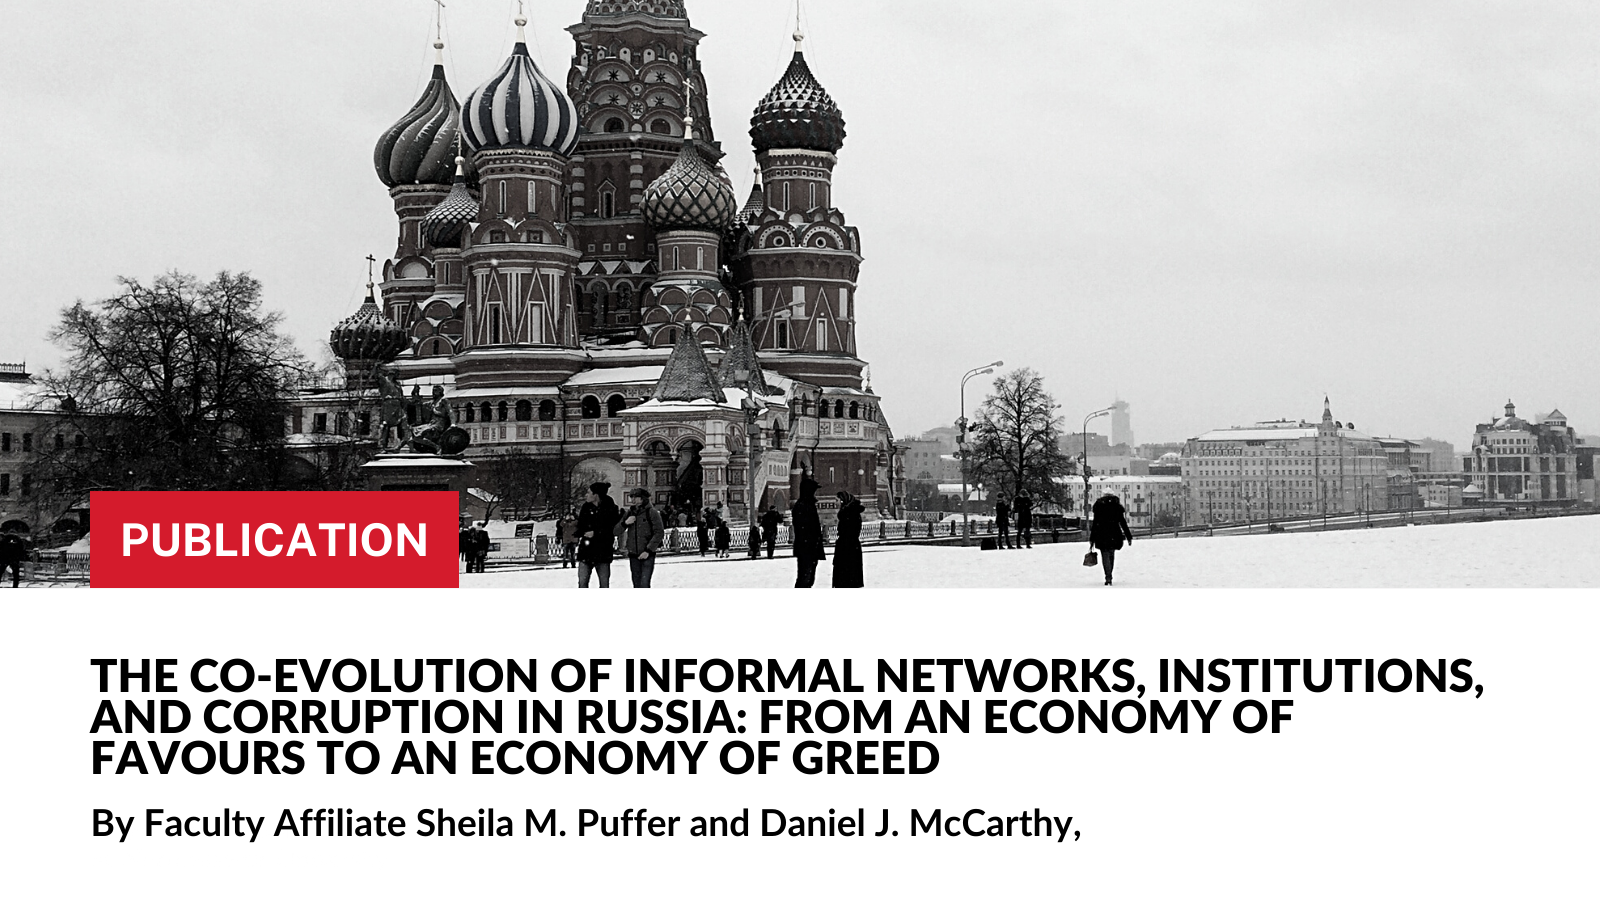 The co-evolution of informal networks, institutions, and corruption in Russia: from an economy of favours to an economy of greed